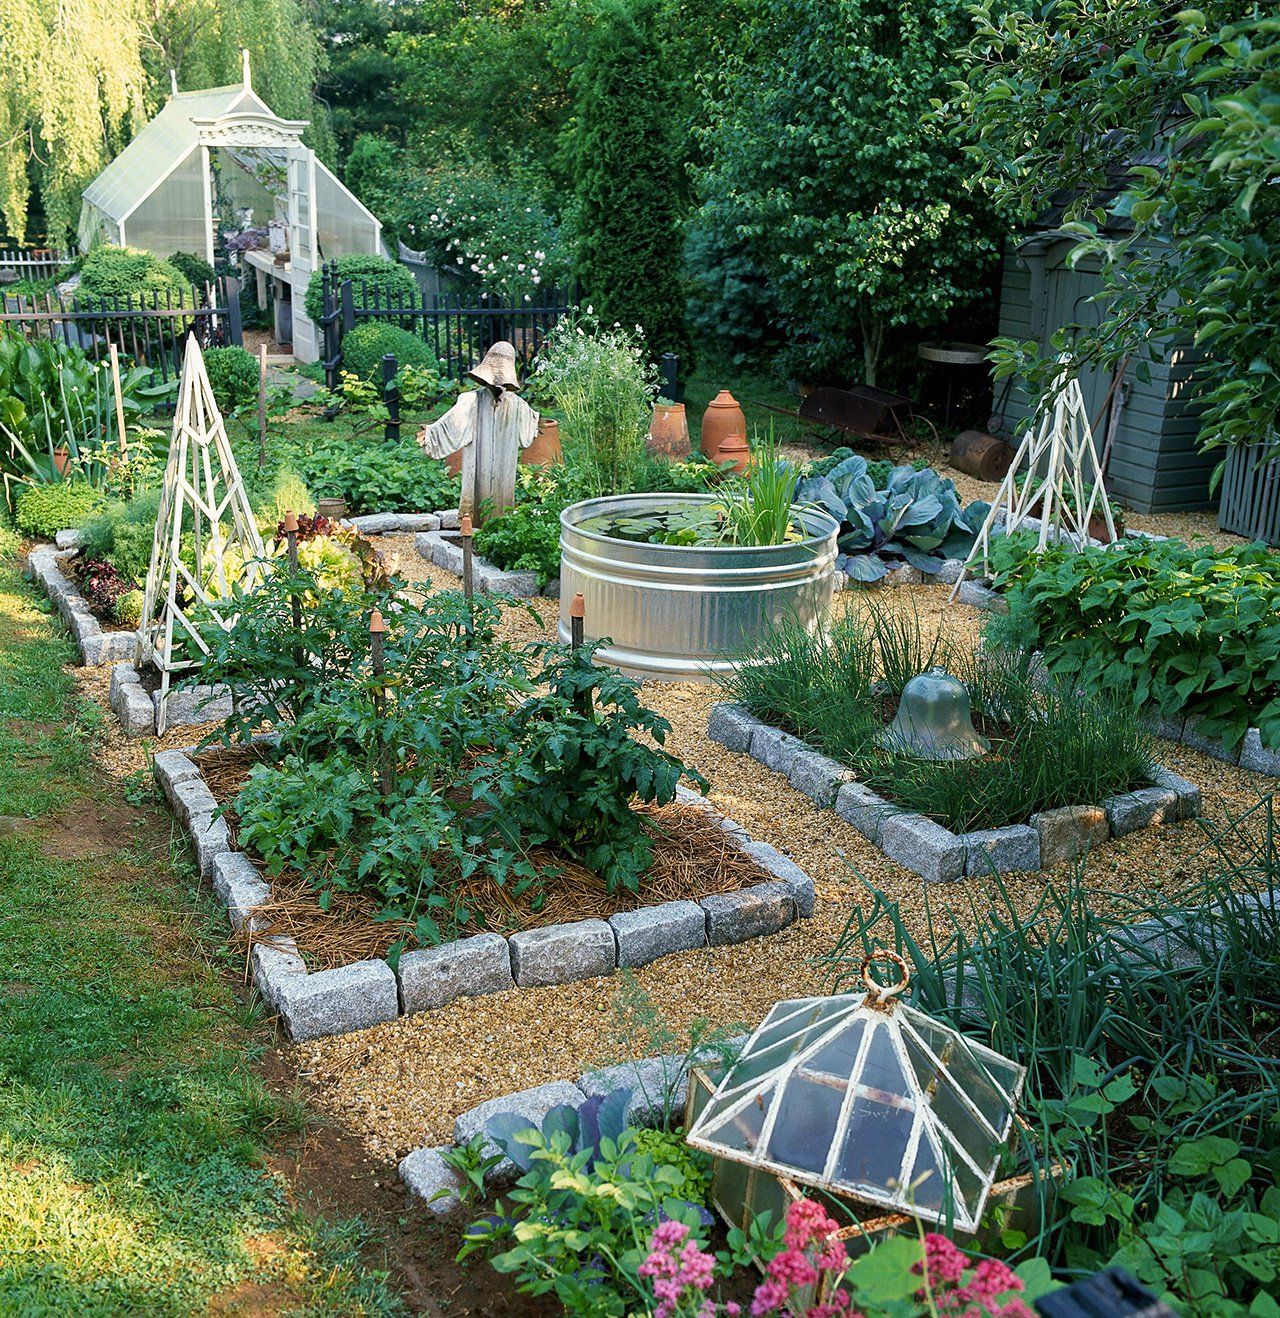 Backyard Garden : Discover the secrets to a thriving backyard garden with these essential tips and tricks